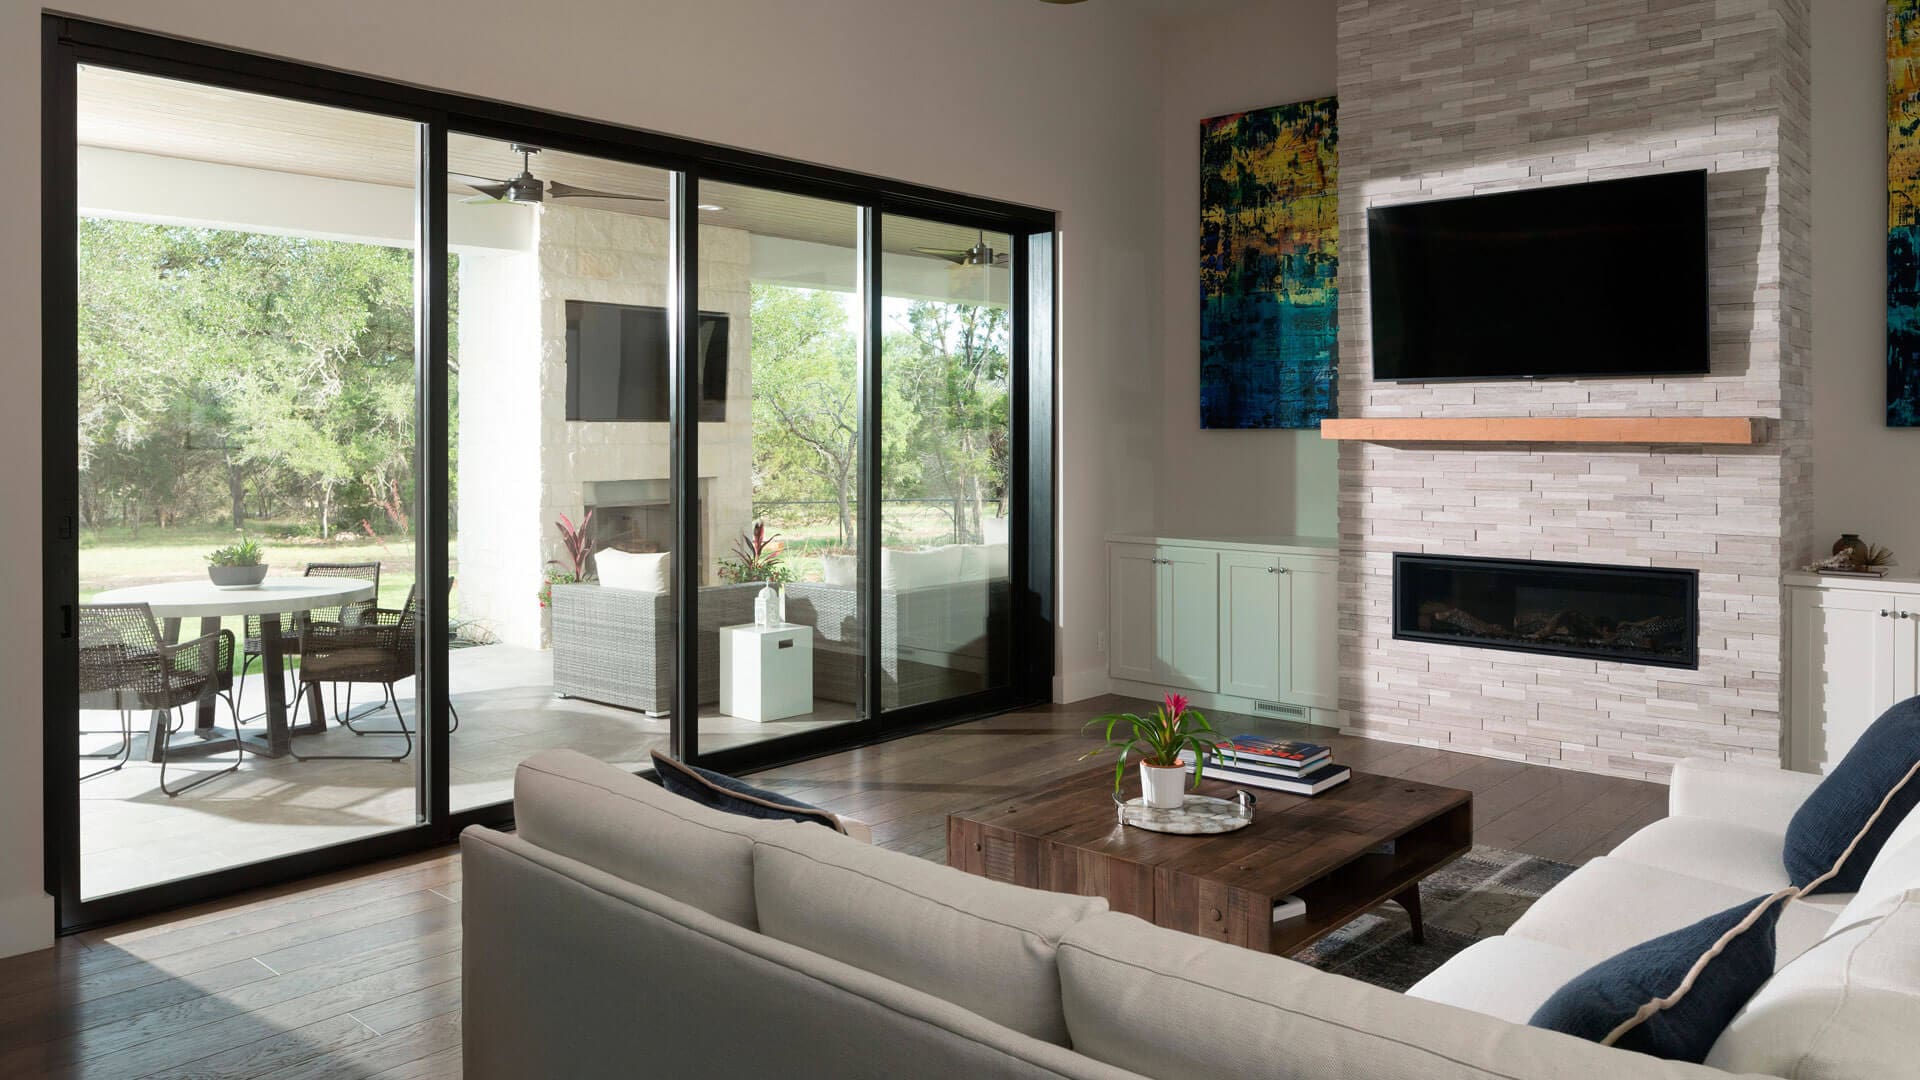 Modern living room with wood flooring, flatscreen tv, and large sliding patio doors leading to outdoor living area.